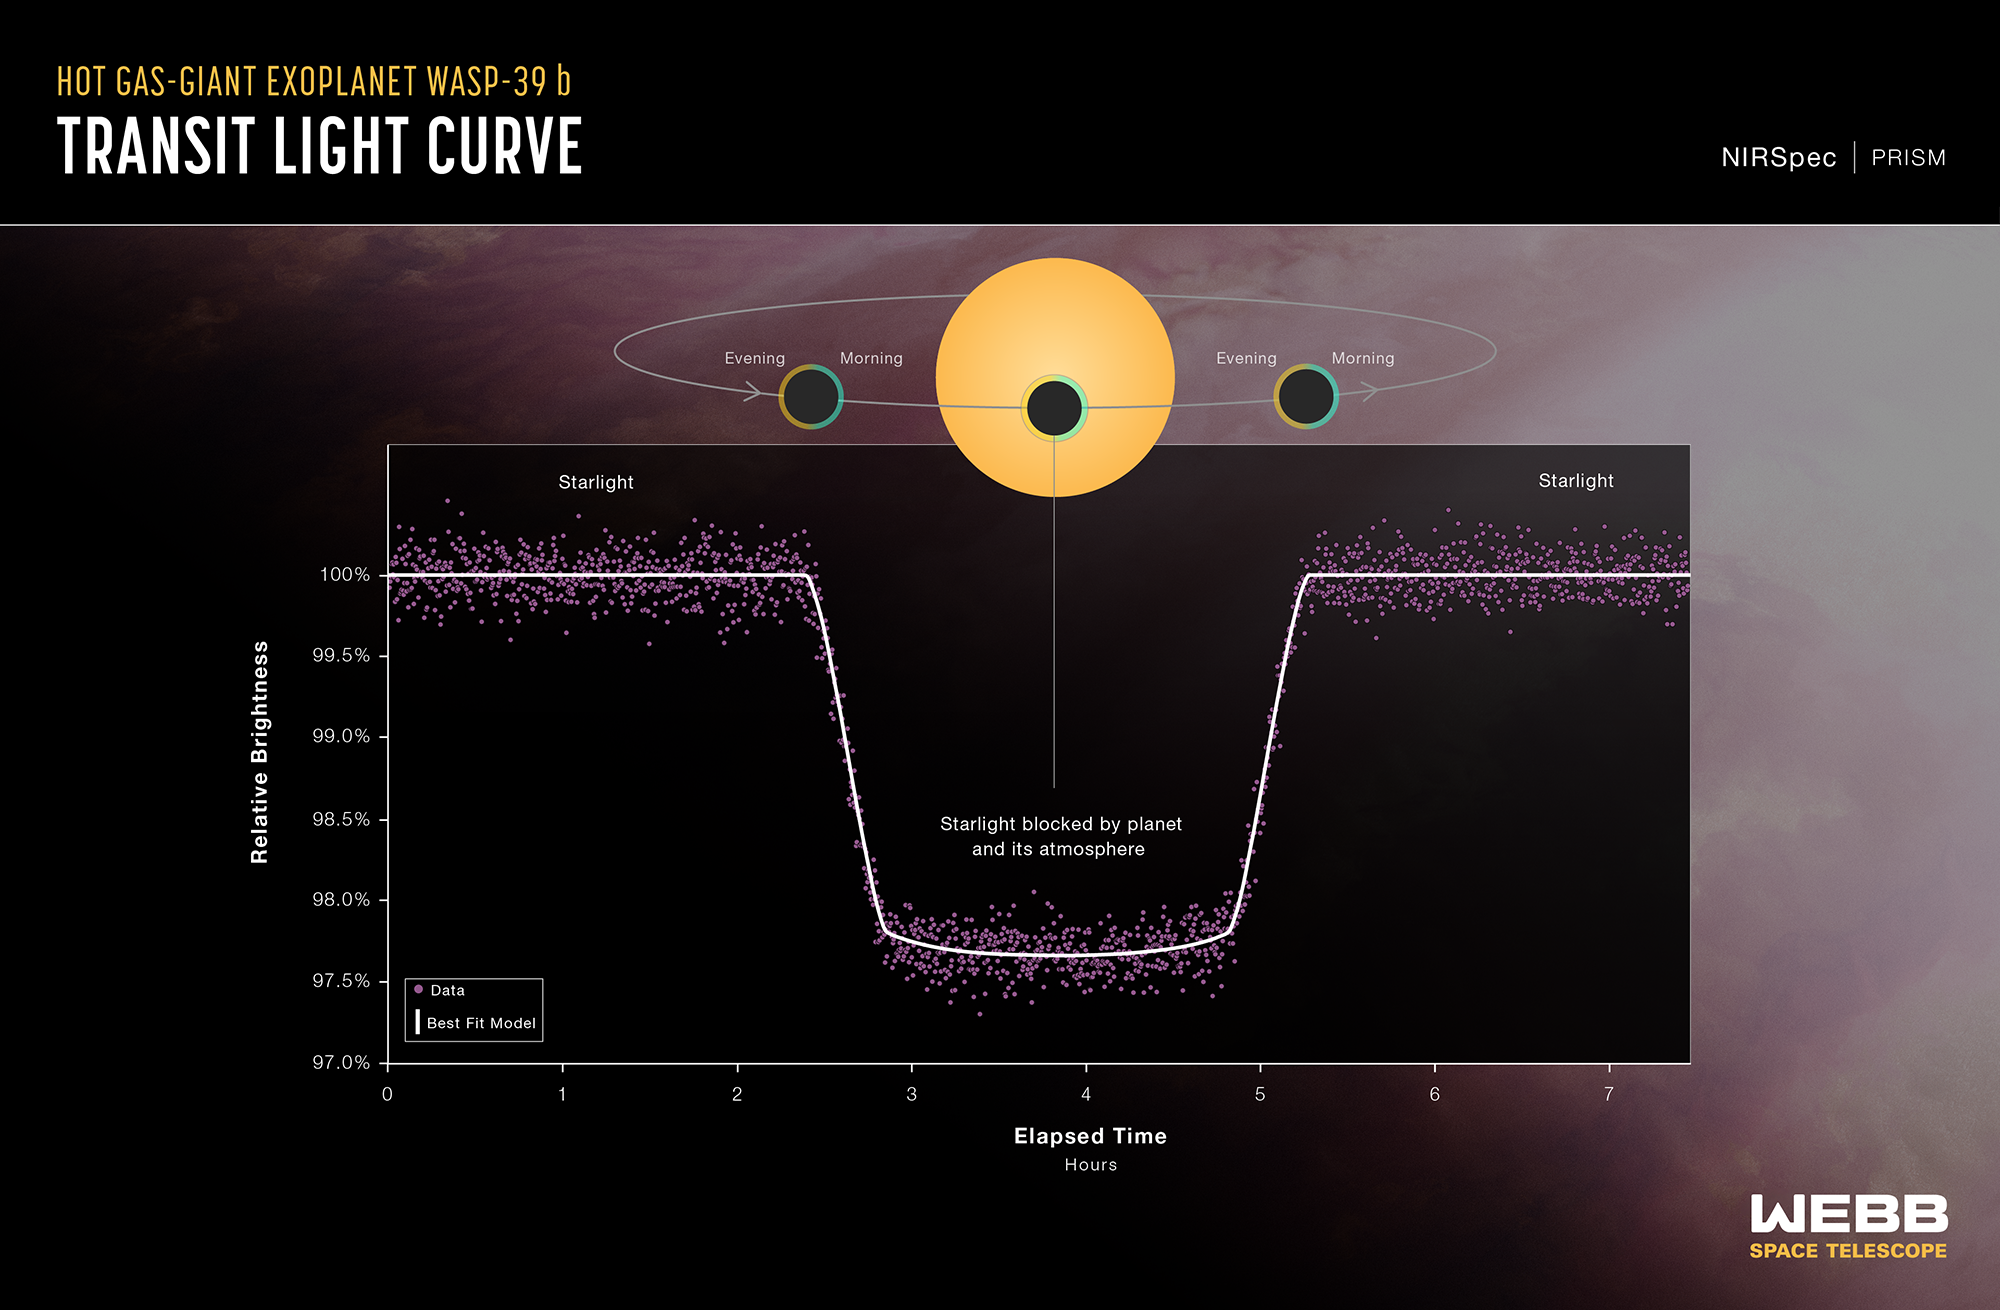 Infographic titled “Hot Gas-Giant Exoplanet WASP-39 b Transit Light Curve, NIRSpec PRISM.” At the top of the infographic is a diagram showing a planet transiting (moving in front of) its star. Below the diagram is a graph showing the change in relative brightness of the star-planet system over 7 hours. The diagram and graph are aligned vertically to show the relationship between the geometry of the star-planet system as the planet orbits, and the measurements on the graph. The infographic shows that the brightness of the system remains steady until the planet begins to transit the star. It then decreases until the planet is directly in front of the star. The brightness increases again until the planet is no longer blocking the star, at which point it levels out. Please reference the extended text description for more details.